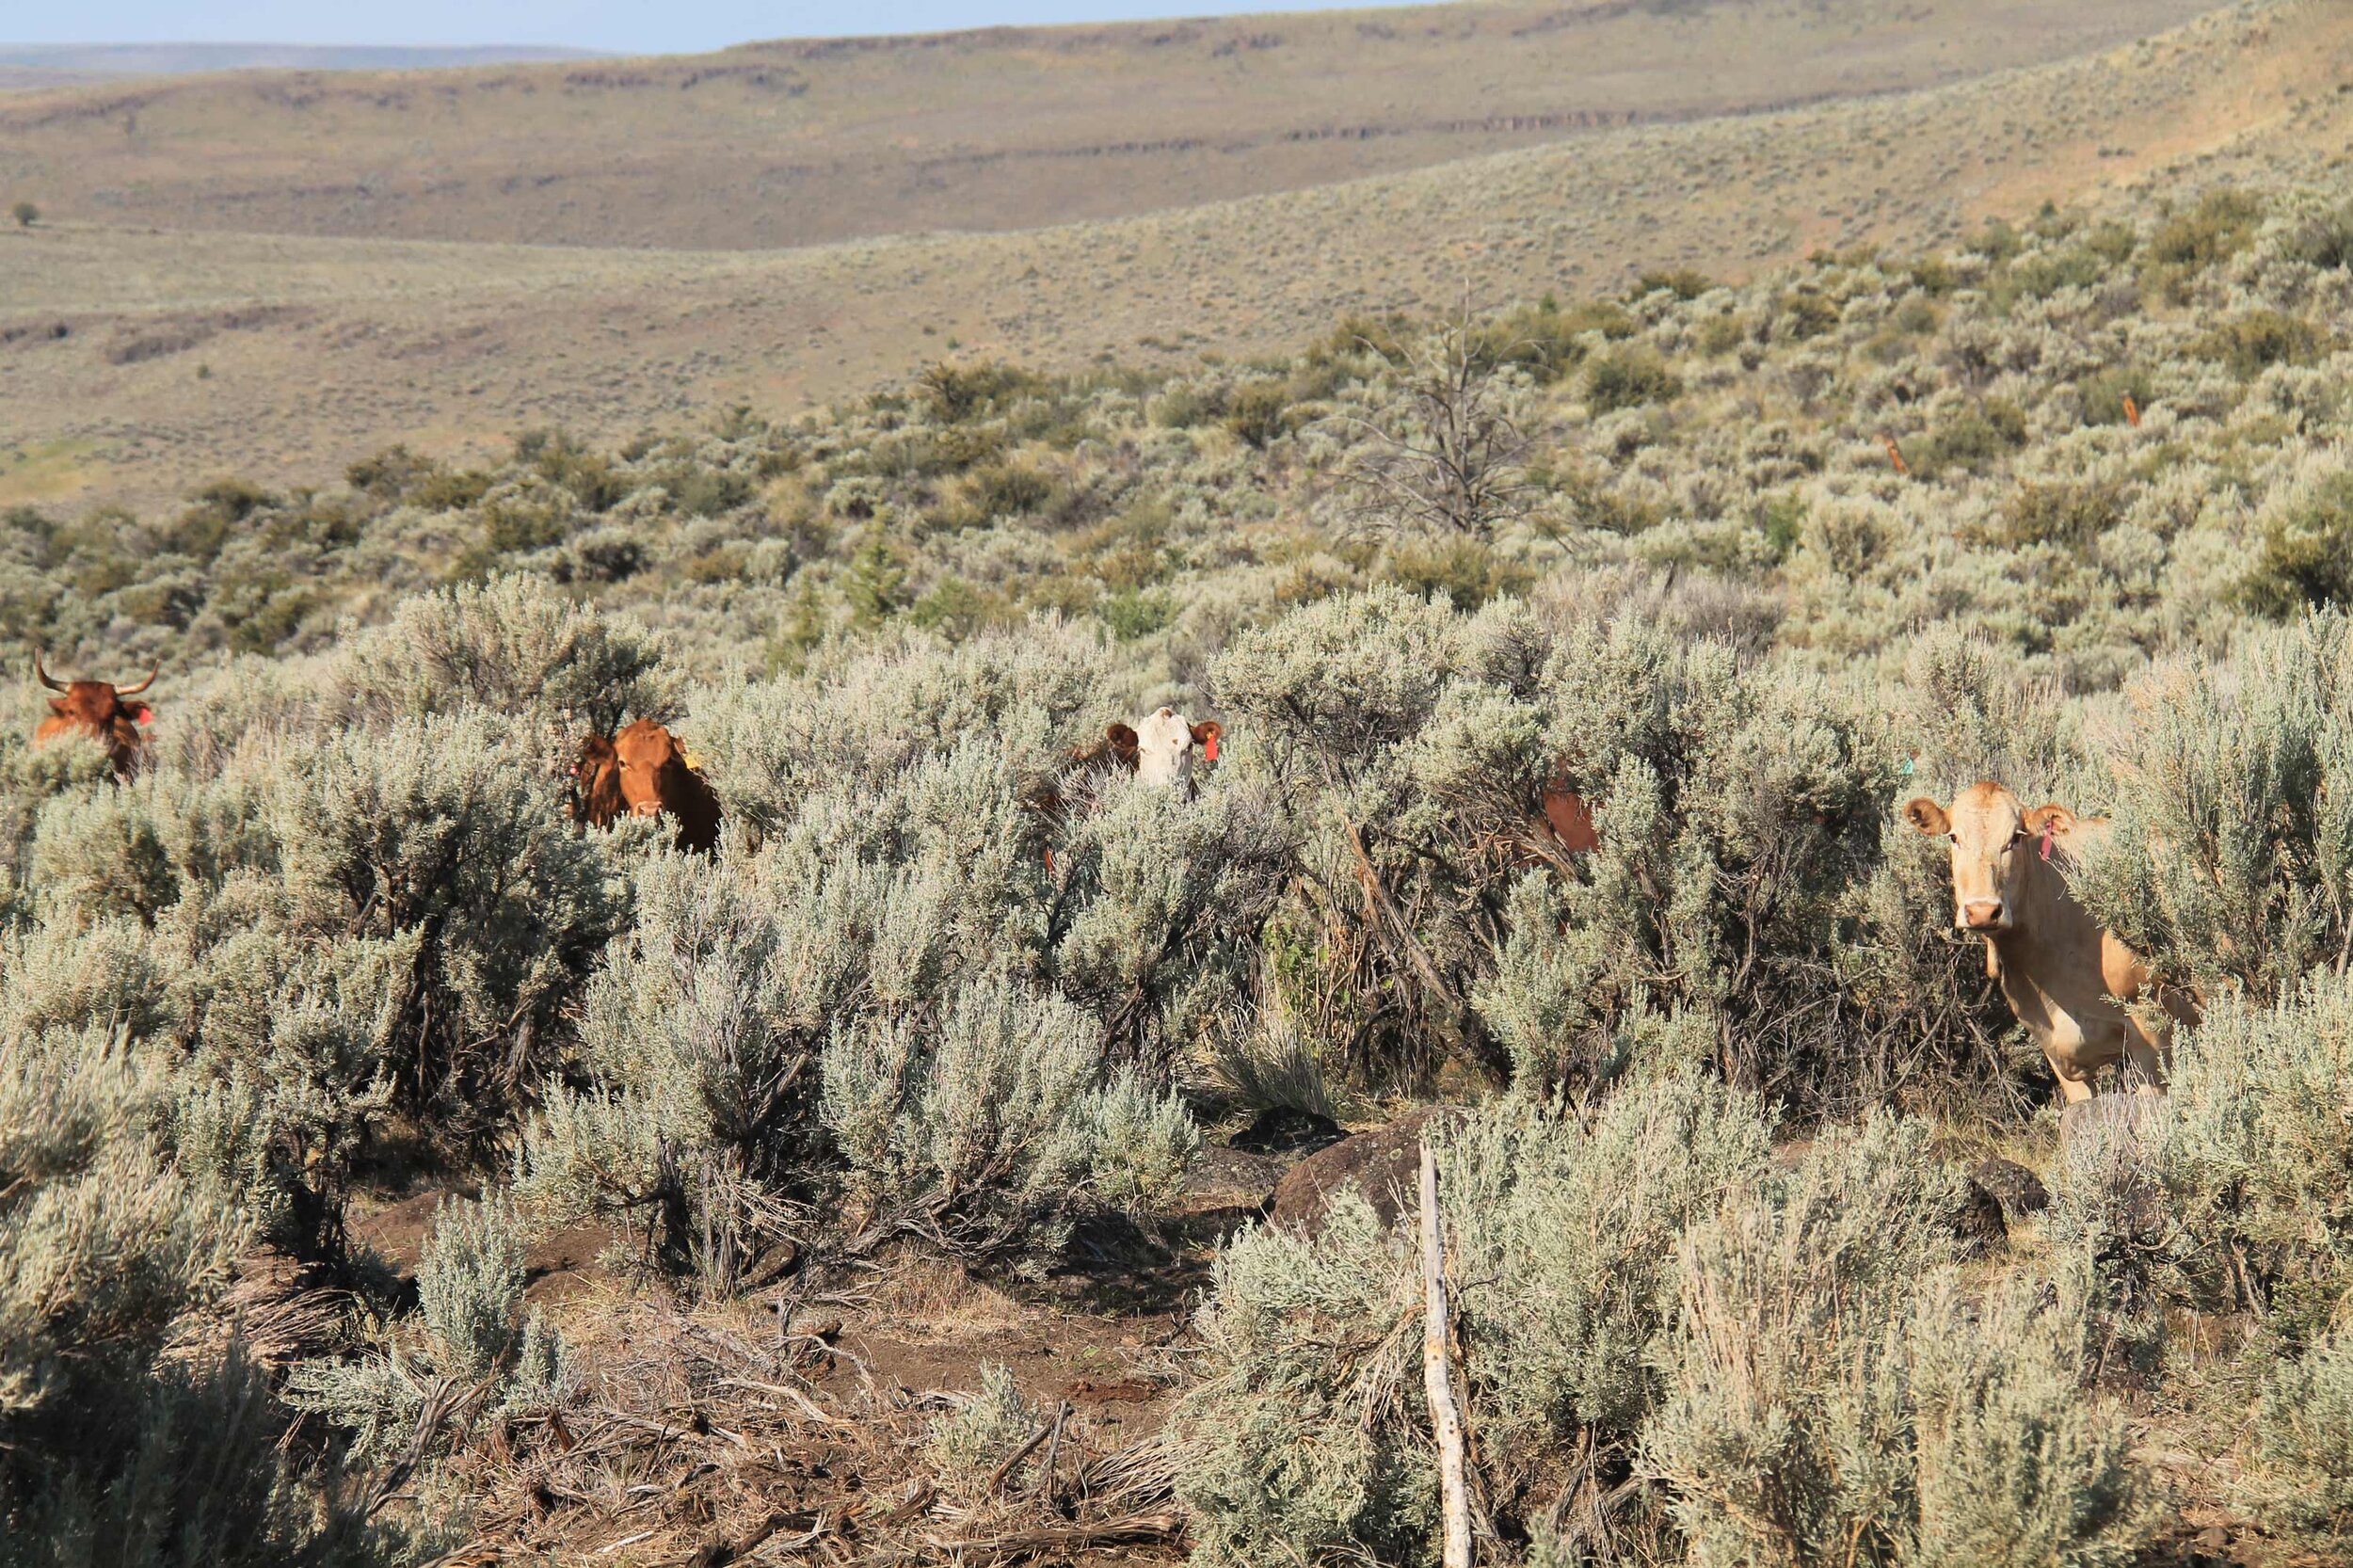  Four cow heads peering out of sagebrush.  